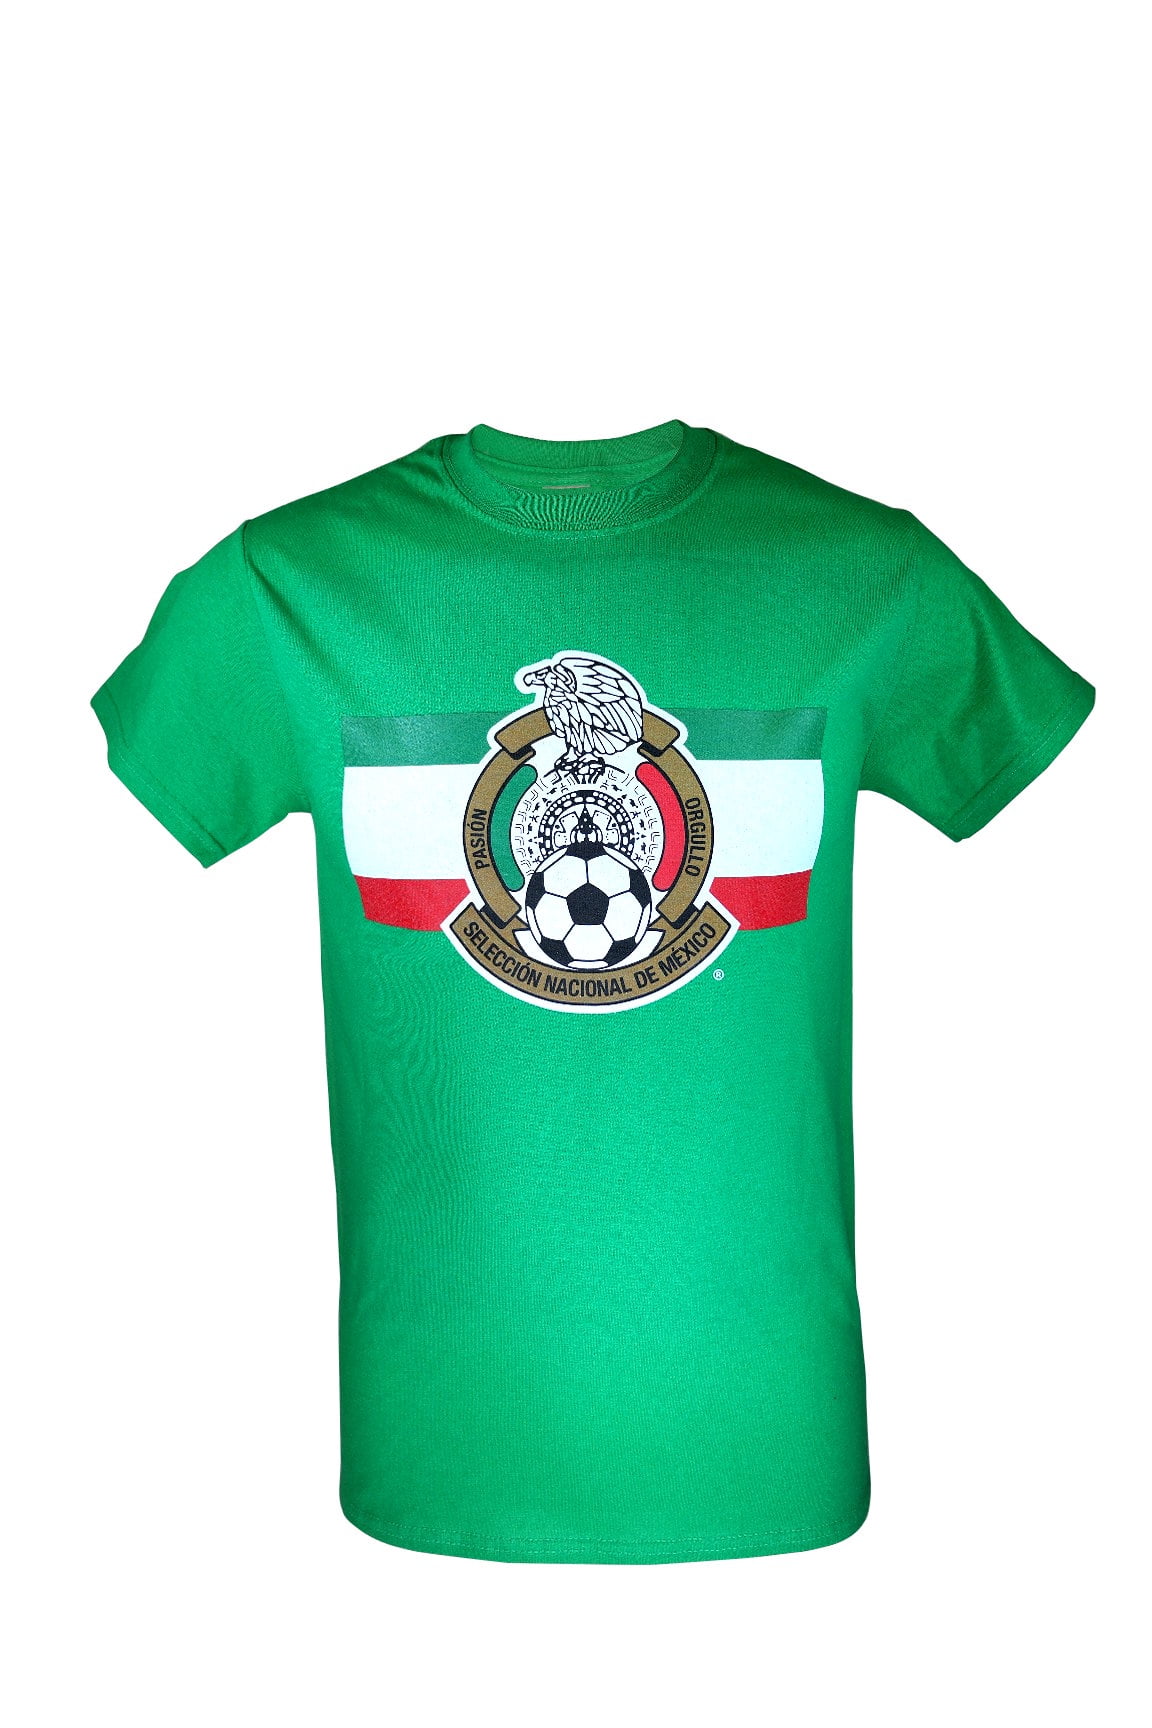 Icon Sports Mexico Soccer T-Shirt Jersey Style Short Sleeve Athletic Country National Football Team Graphic Active Tee Top 